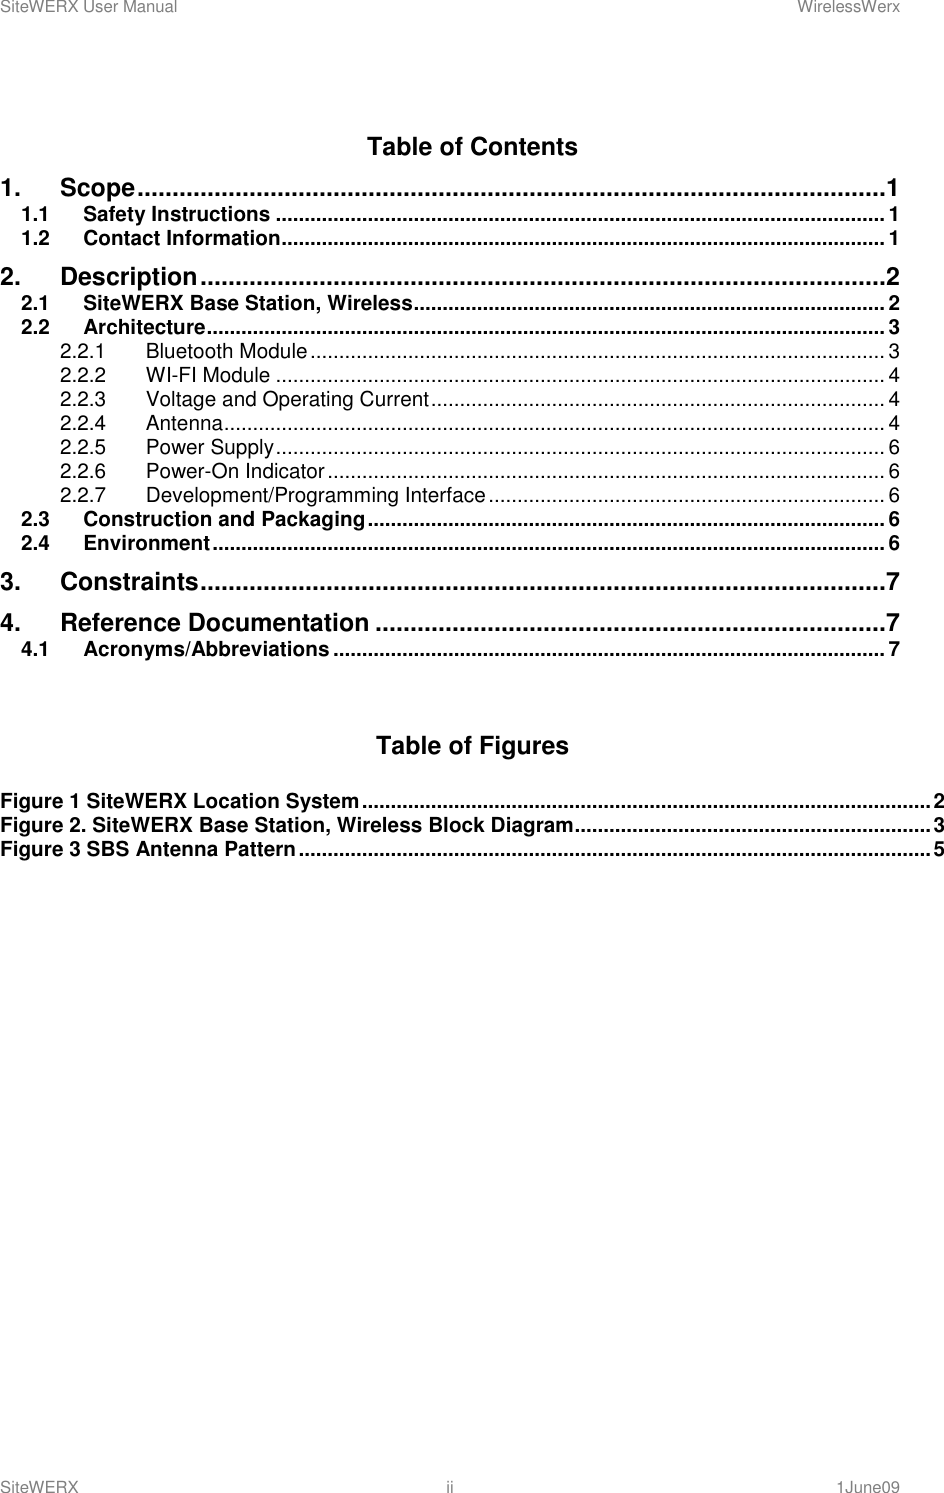 SiteWERX User Manual    WirelessWerx SiteWERX  ii  1June09   Table of Contents 1. Scope ...........................................................................................................1 1.1 Safety Instructions .......................................................................................................... 1 1.2 Contact Information......................................................................................................... 1 2. Description ..................................................................................................2 2.1 SiteWERX Base Station, Wireless .................................................................................. 2 2.2 Architecture ...................................................................................................................... 3 2.2.1 Bluetooth Module .................................................................................................... 3 2.2.2 WI-FI Module .......................................................................................................... 4 2.2.3 Voltage and Operating Current ............................................................................... 4 2.2.4 Antenna ................................................................................................................... 4 2.2.5 Power Supply .......................................................................................................... 6 2.2.6 Power-On Indicator ................................................................................................. 6 2.2.7 Development/Programming Interface ..................................................................... 6 2.3 Construction and Packaging .......................................................................................... 6 2.4 Environment ..................................................................................................................... 6 3. Constraints ..................................................................................................7 4. Reference Documentation .........................................................................7 4.1 Acronyms/Abbreviations ................................................................................................ 7   Table of Figures  Figure 1 SiteWERX Location System ................................................................................................... 2 Figure 2. SiteWERX Base Station, Wireless Block Diagram .............................................................. 3 Figure 3 SBS Antenna Pattern .............................................................................................................. 5          